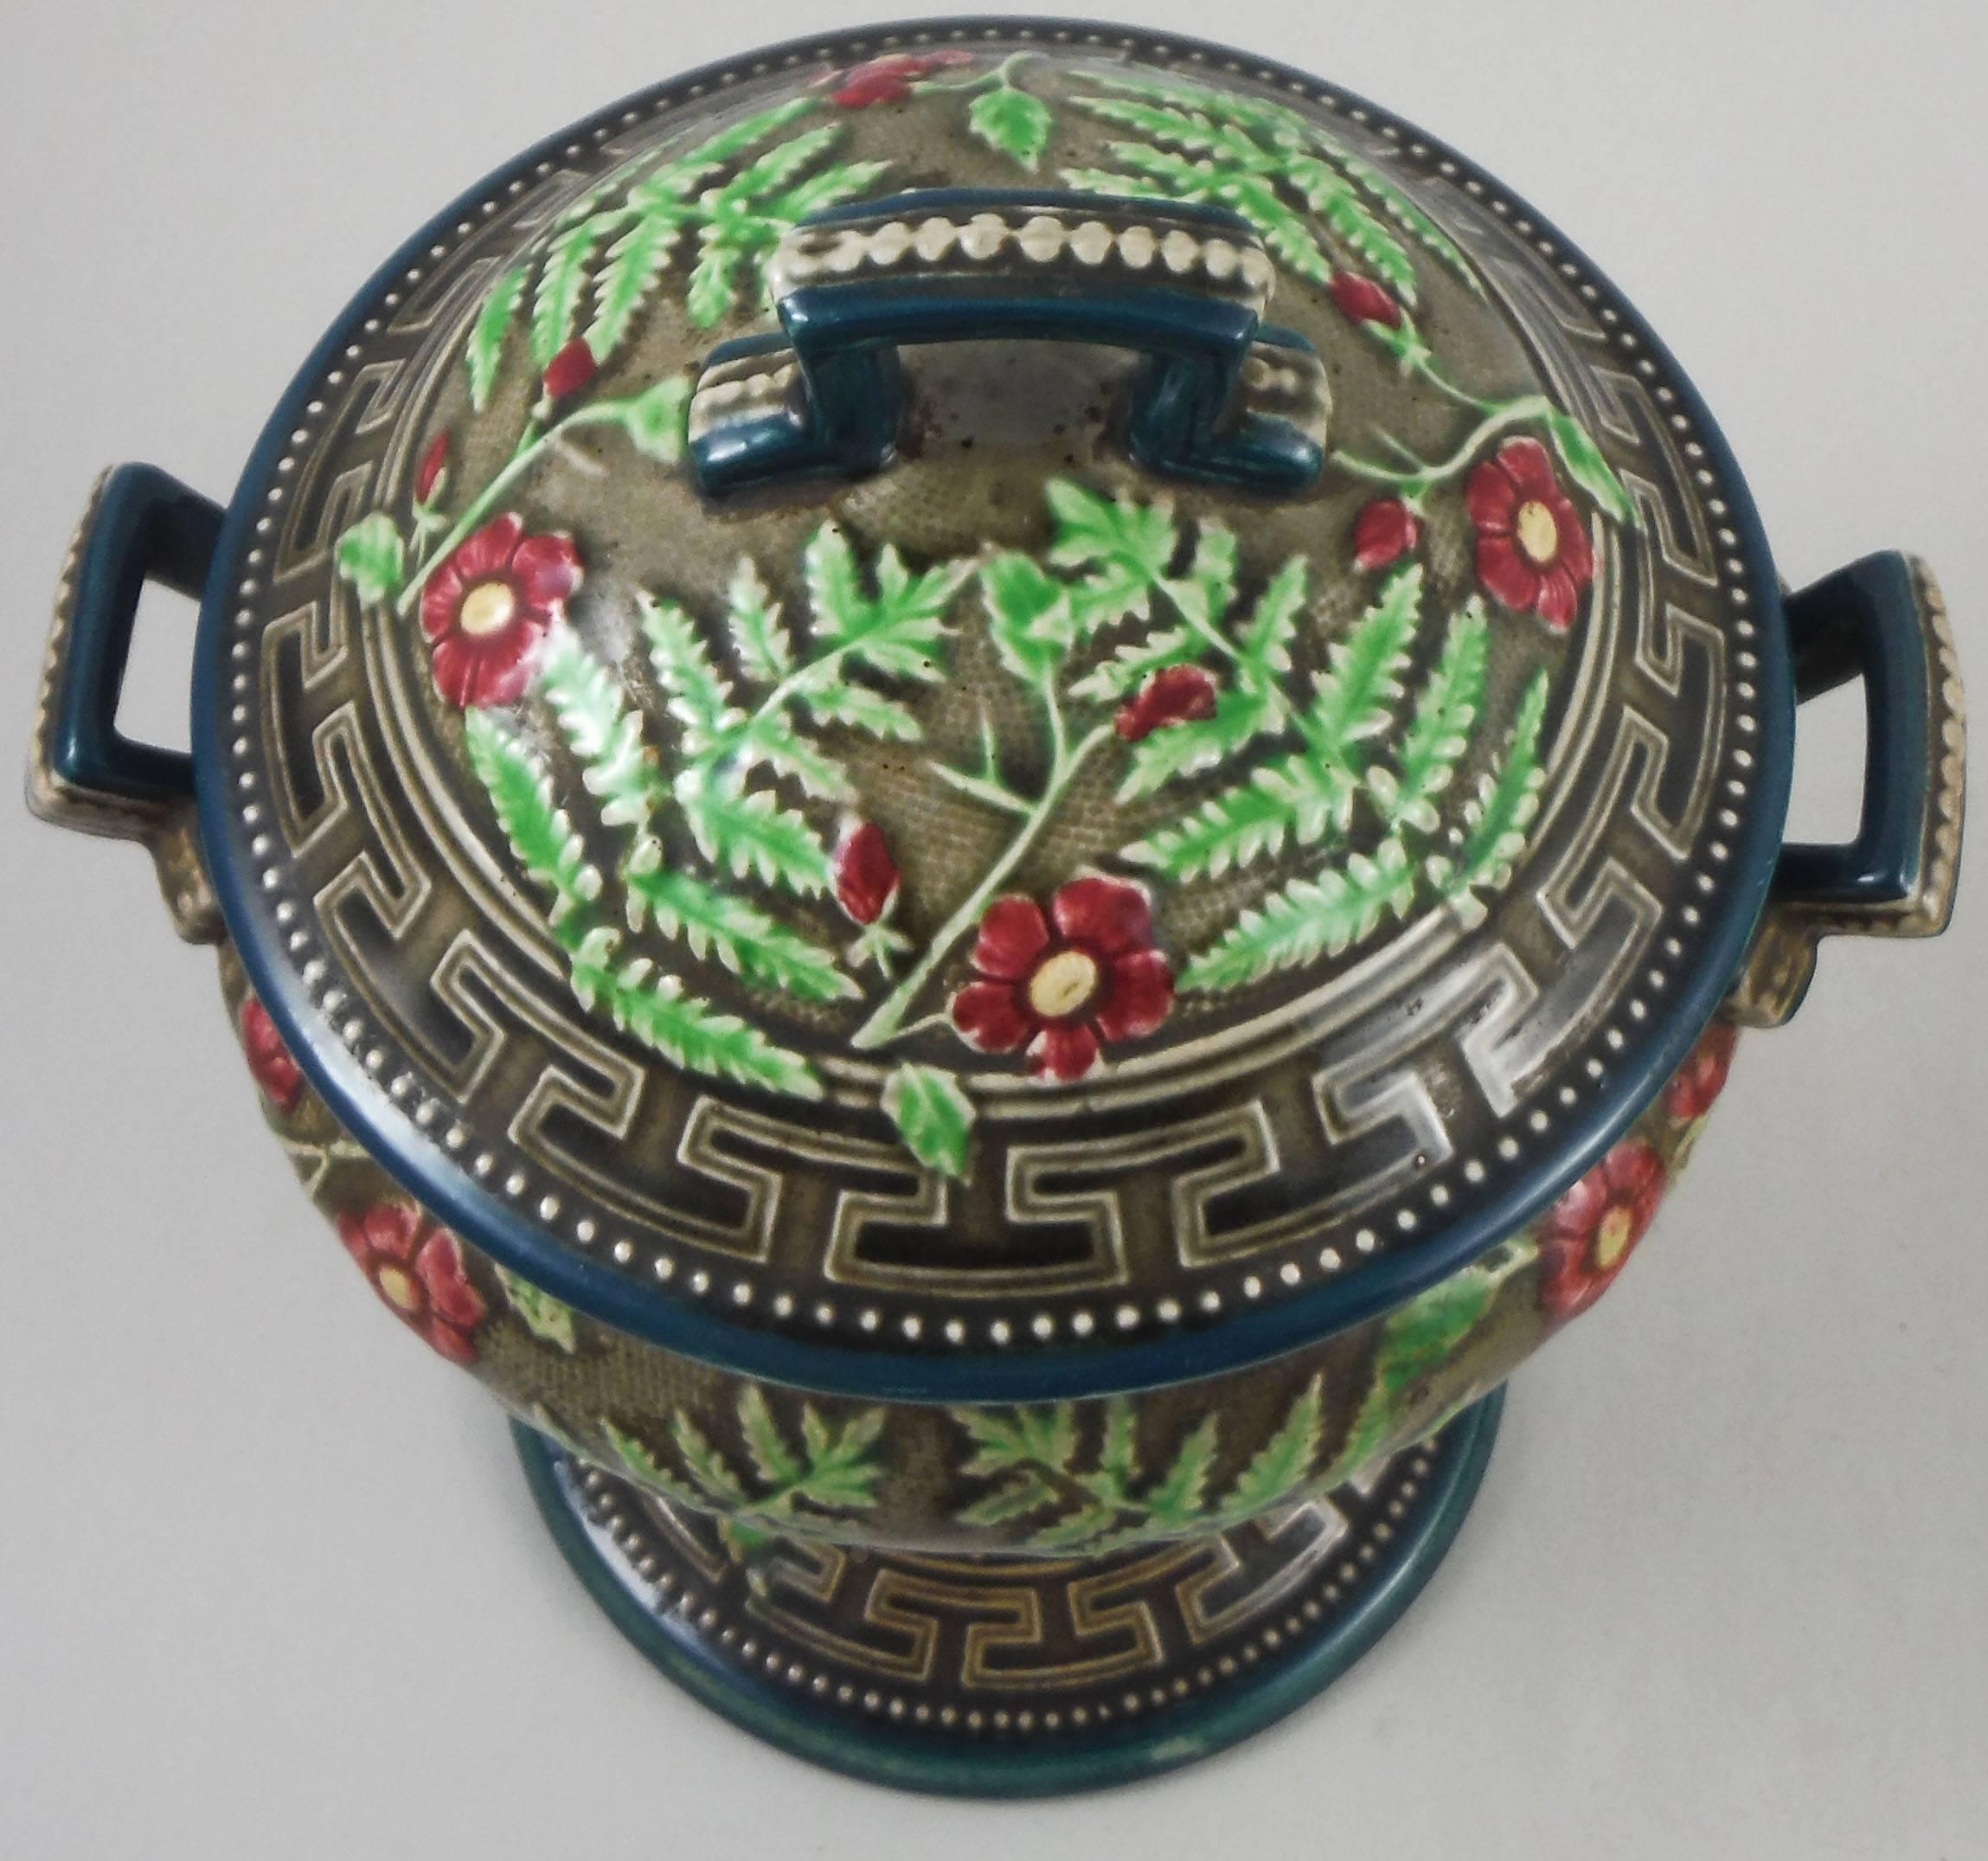 Unusual 19th century Majolica tall lidded footed bowl signed Choisy le Roi.
Usually found in brown background, the dark grey bowl is decorated with ferns leaves and red flowers, Greek key borders.